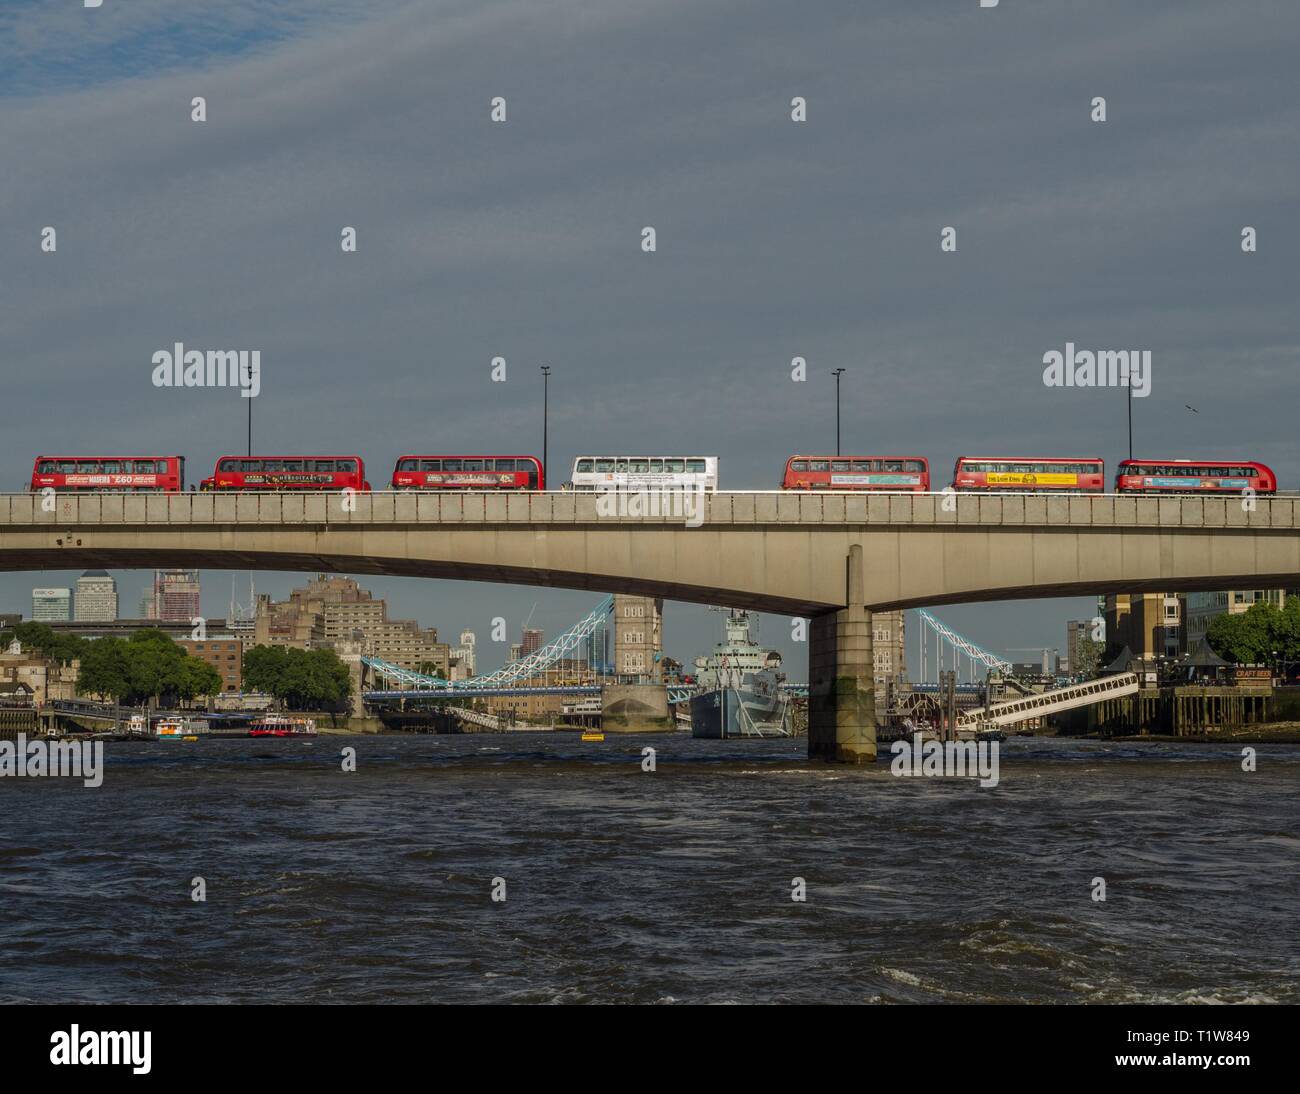 A queue of double-decker buses attempting to cross London Bridge, London, England. Stock Photo